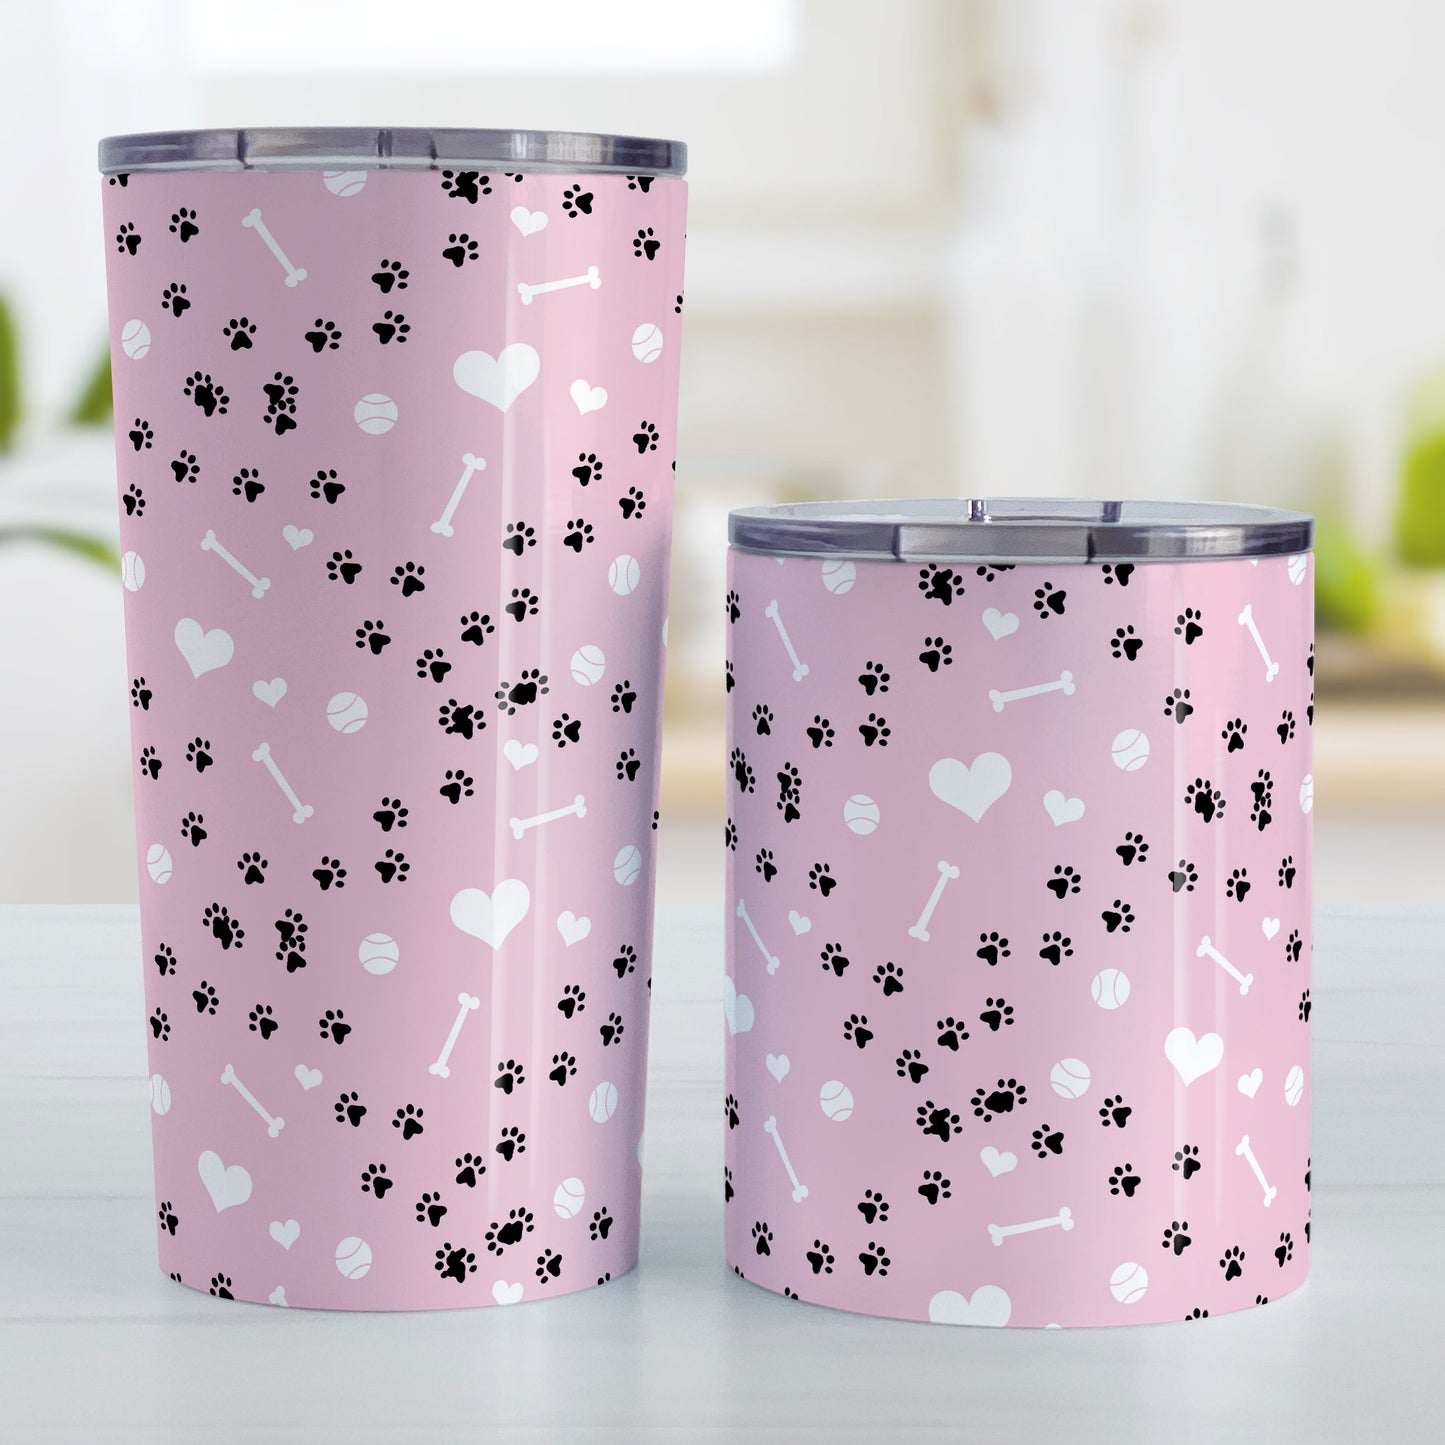 Puppy Run Pink Dog Tumbler Cup (20oz or 10oz) at Amy's Coffee Mugs. Stainless steel insulated tumbler cups designed with a pattern of chaotic tracks of puppy paw prints running around the cups with white dog bones, playing balls, and hearts over a light pink background that wraps around the cups. These cups are perfect for people who love puppy dogs, cute paw print designs, and the color pink. Photo shows both sized cups next to each other.